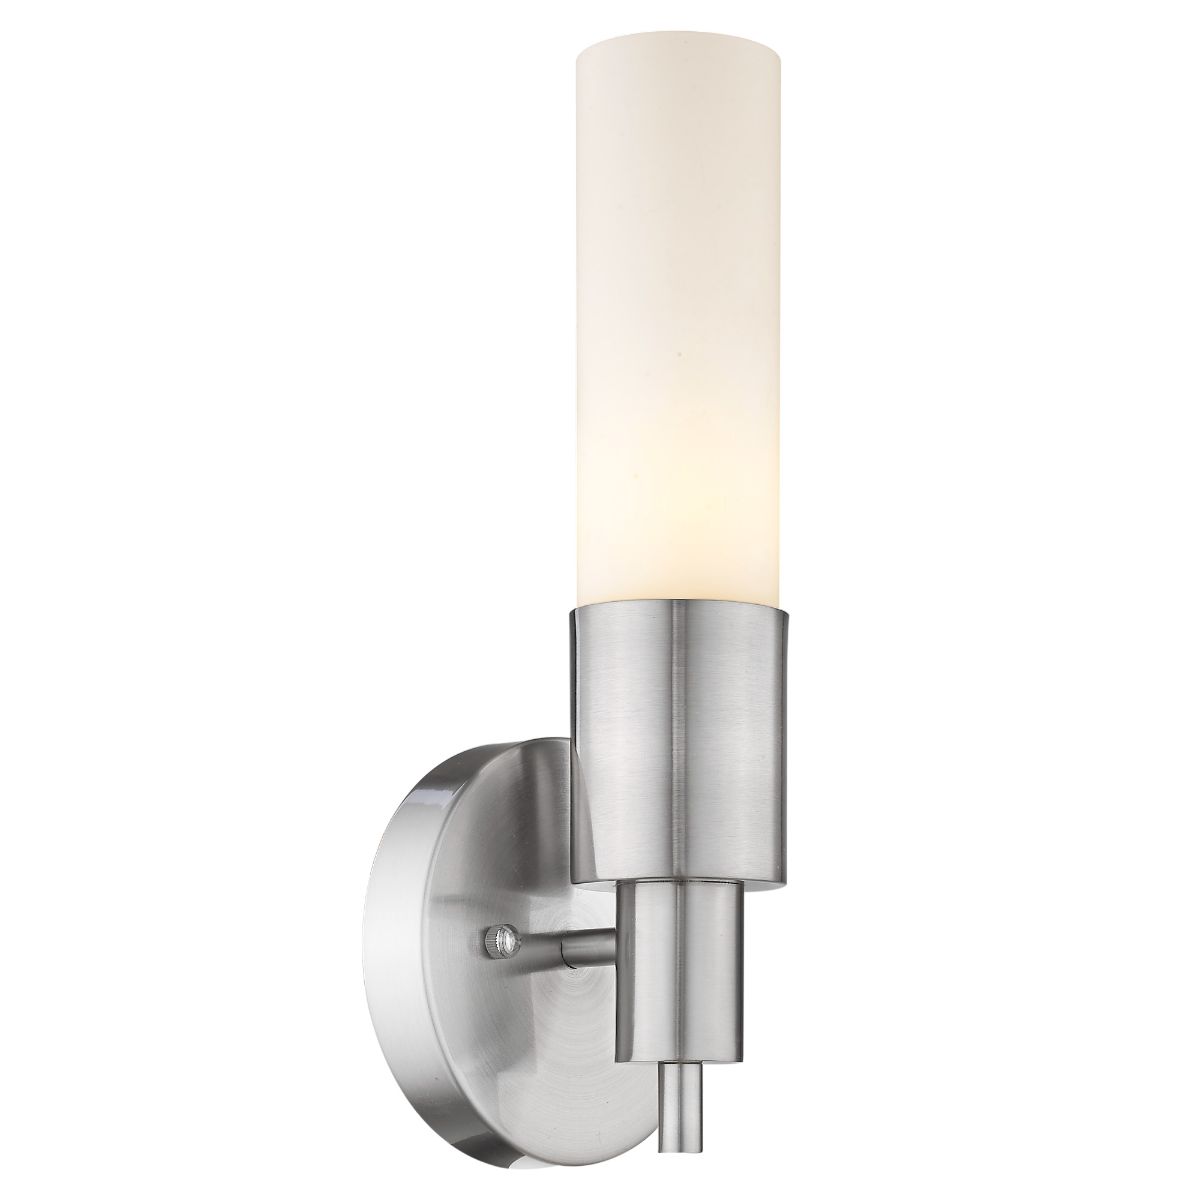 Generations 14 in. Armed Sconce Nickel Finish